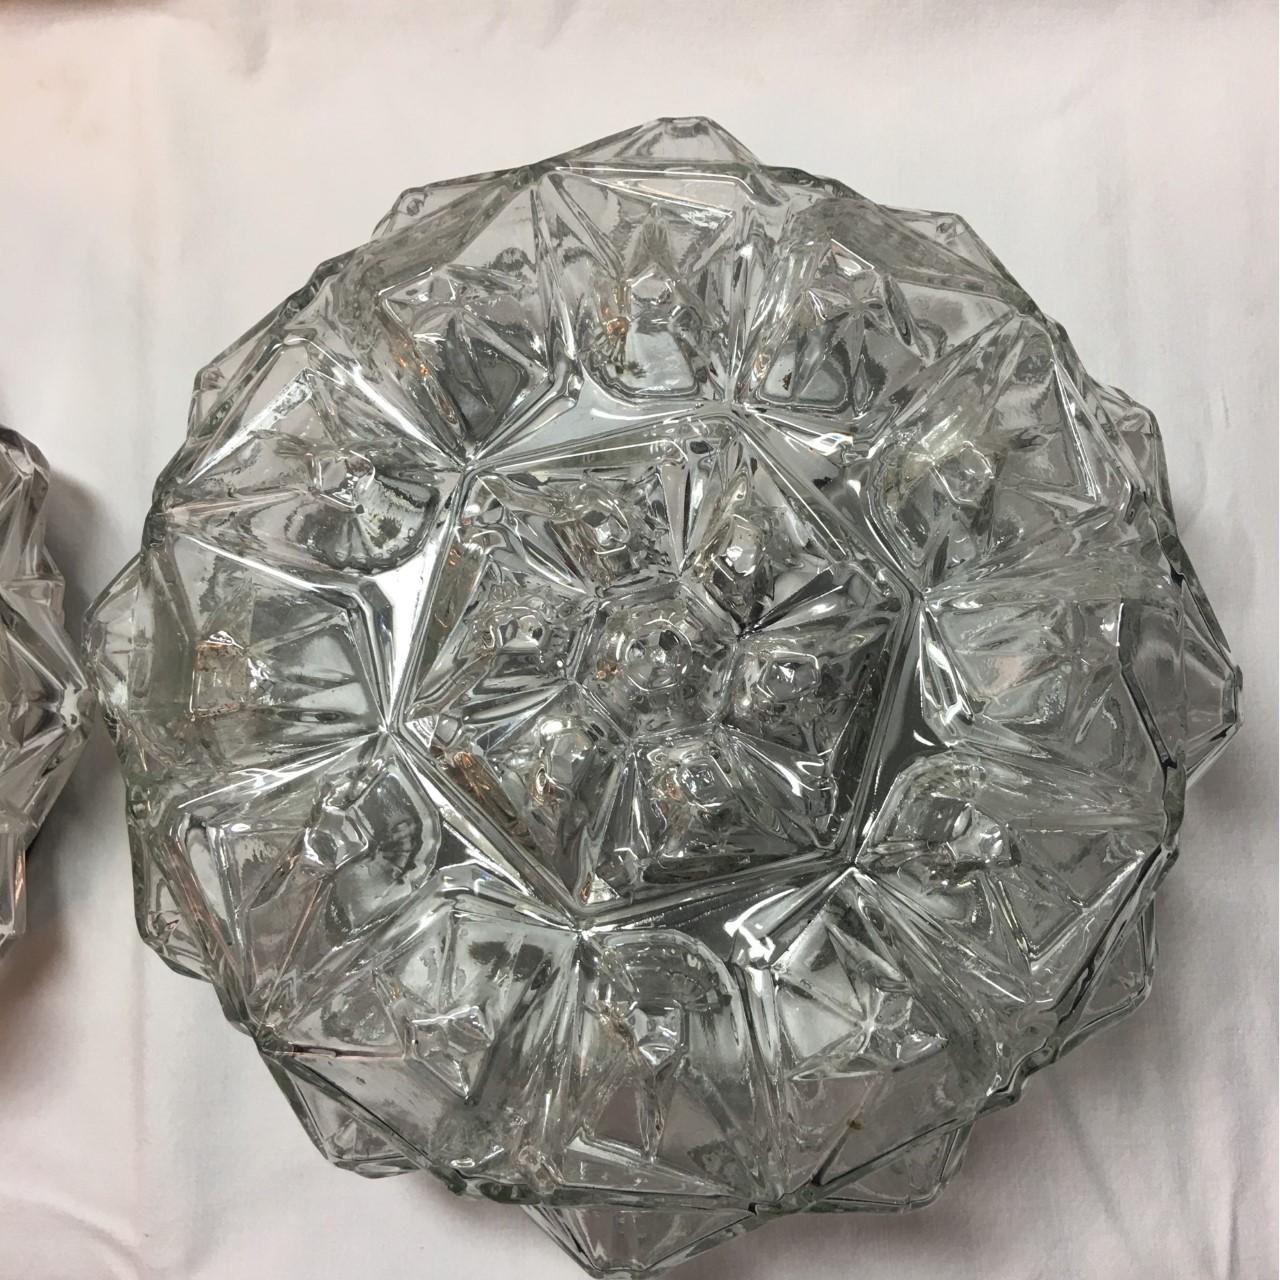 An elegant pair of round 1960s geometric glass structure flush mounts or sconces from Germany. The geometric structure of the glass helps create a fantastic lighting effect in the room. Each fixture requires one European E 26 / E27 Edison bulb, each